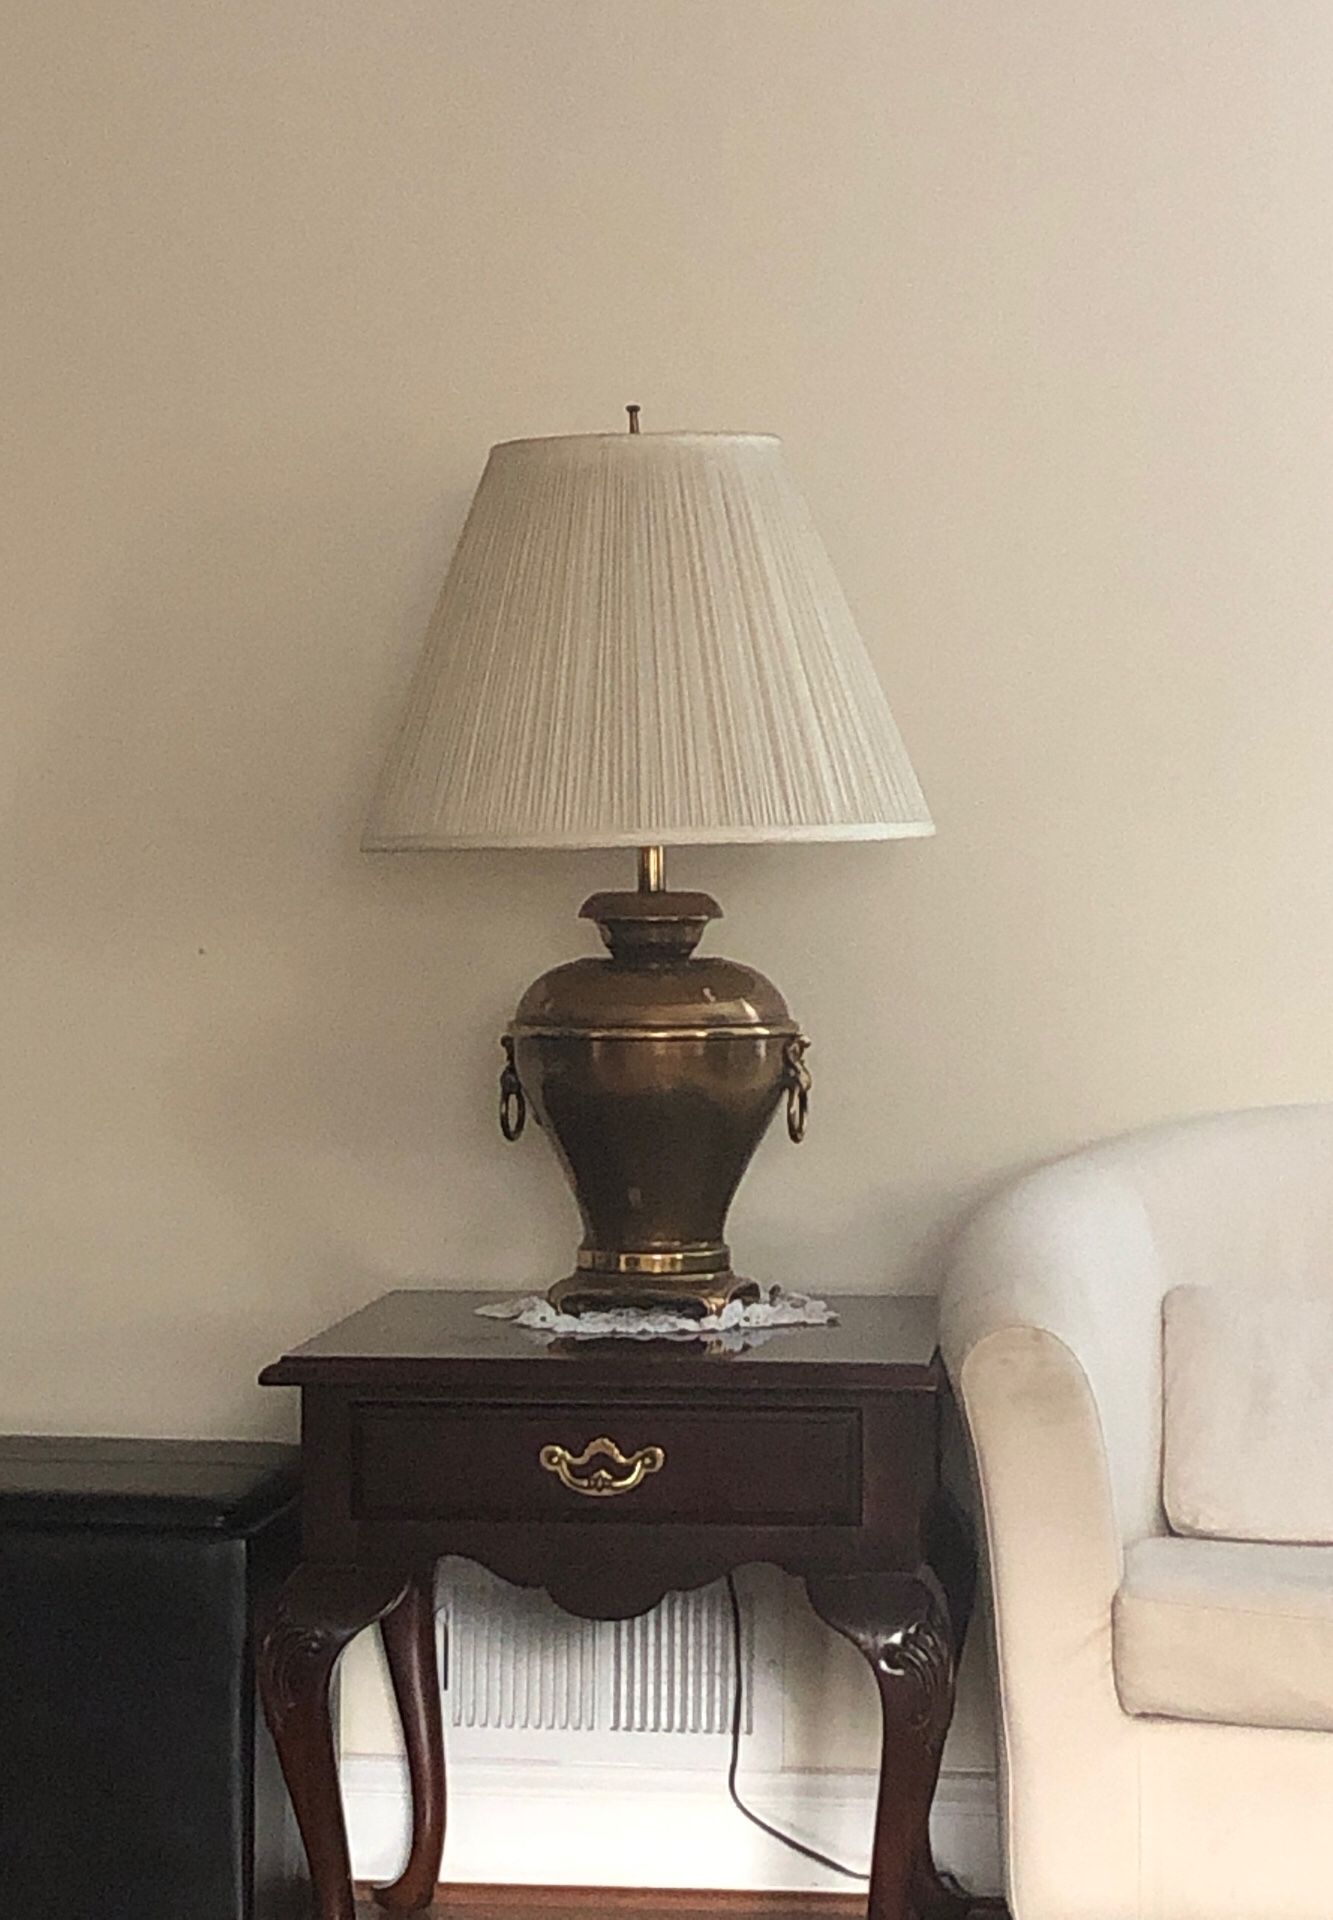 2 for $100 Antique table lamps